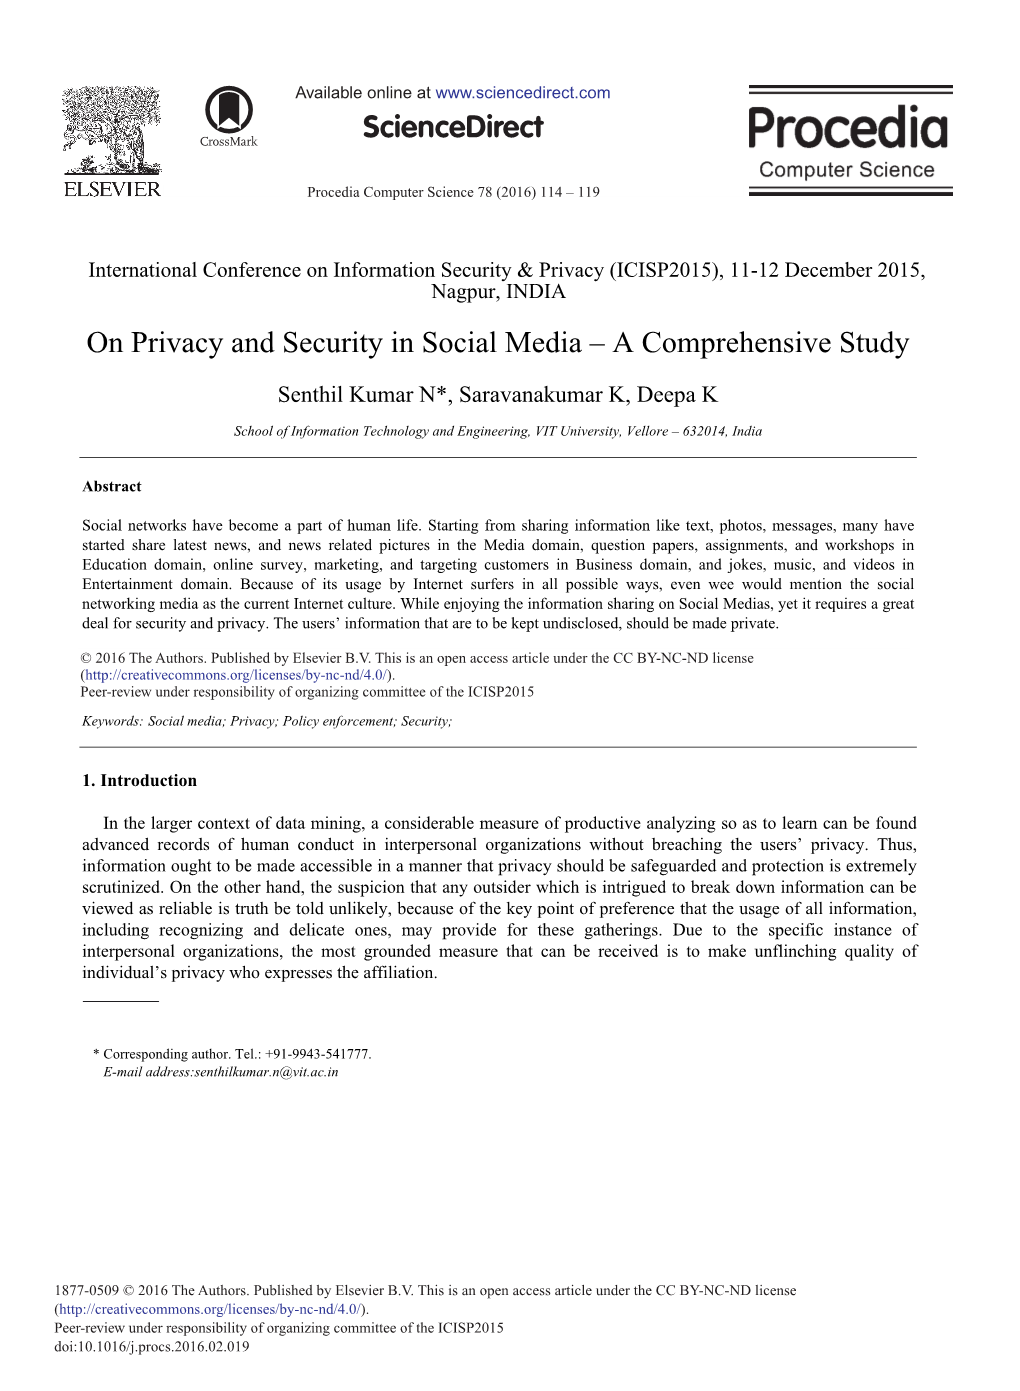 On Privacy and Security in Social Media – a Comprehensive Study